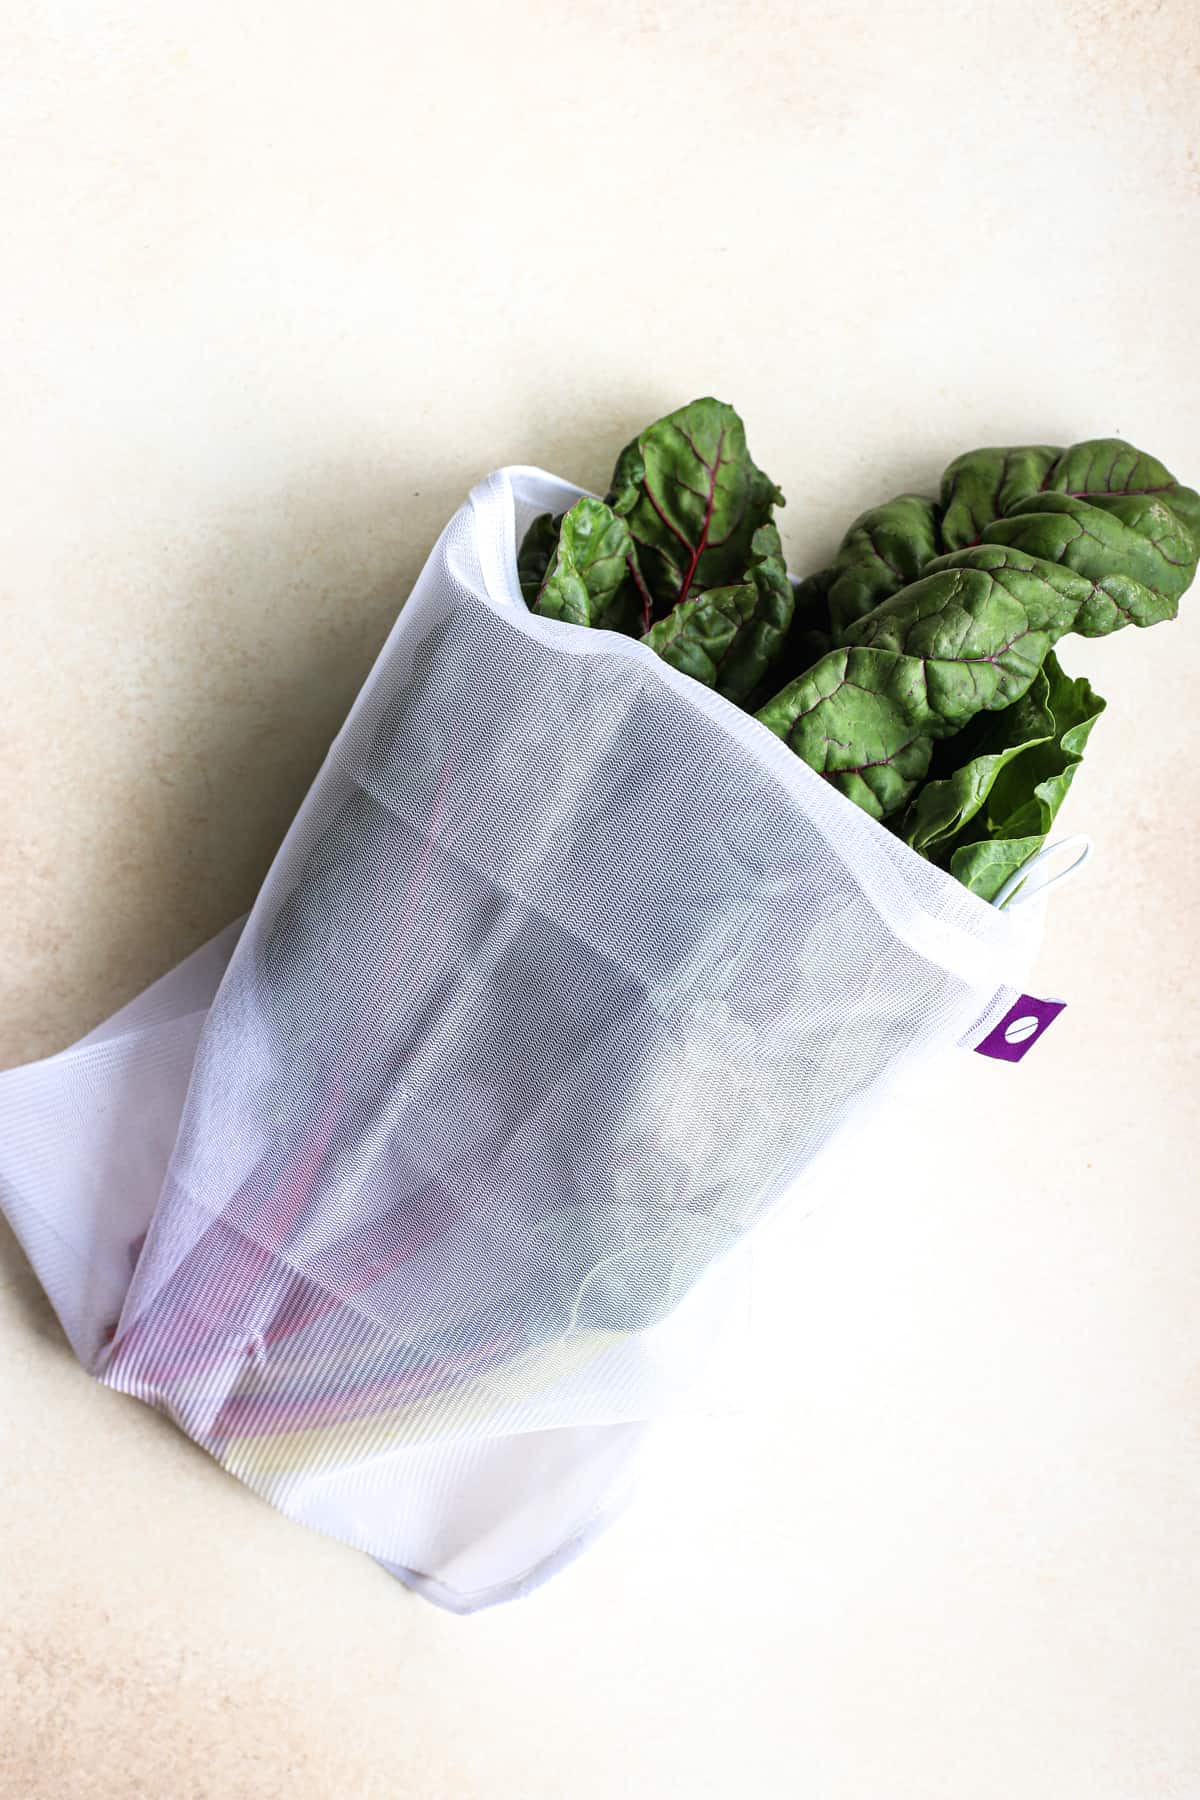 Swiss chard in white reusable produce bag, to show what a CSA is and might include